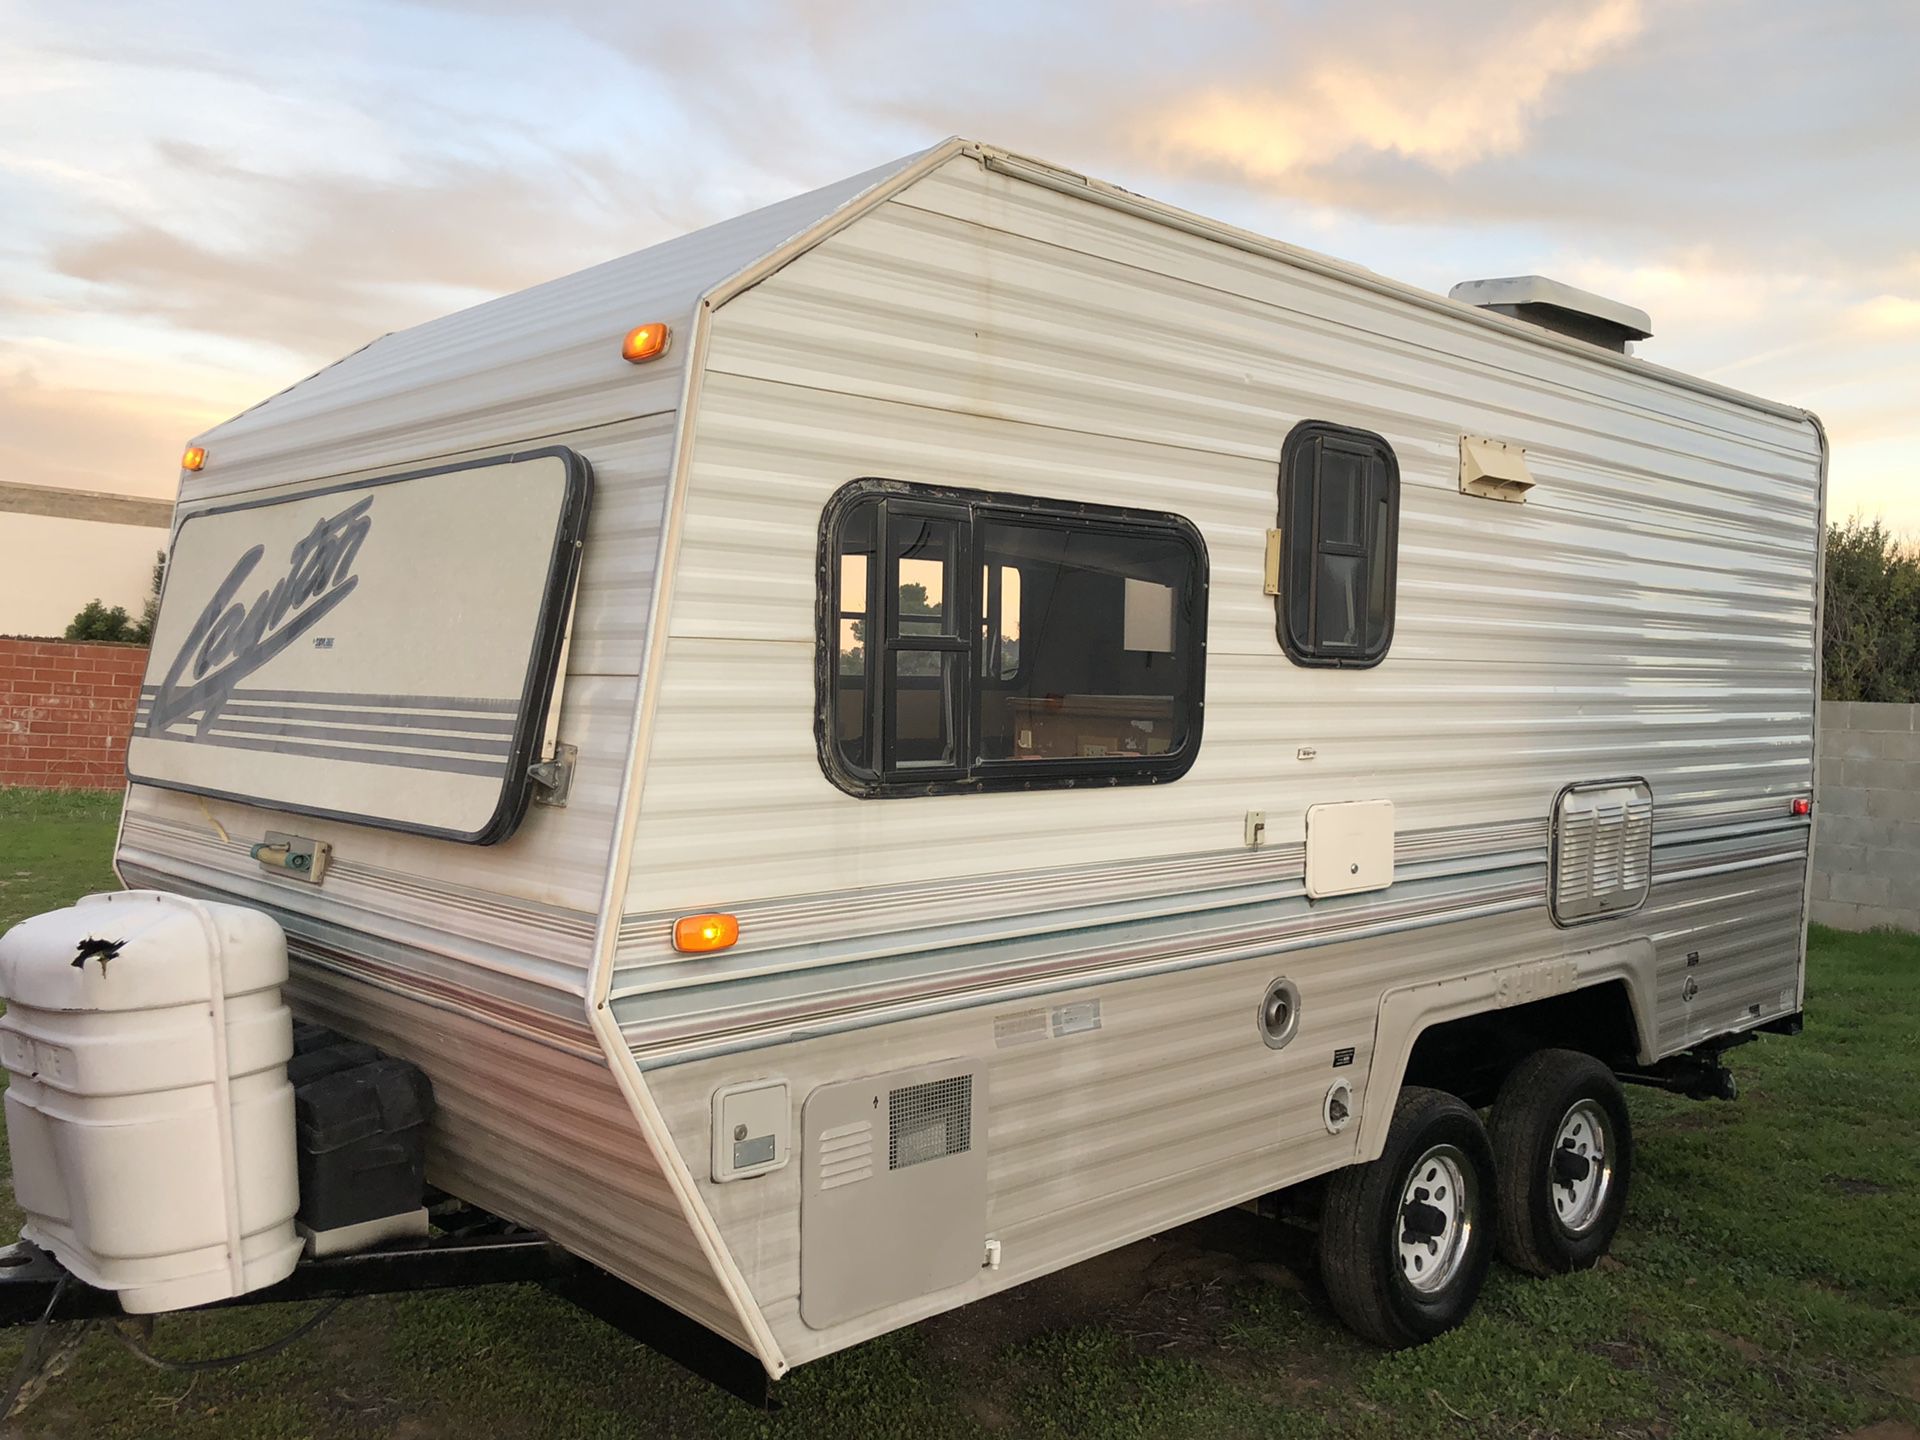 15 ft travel trailers for sale